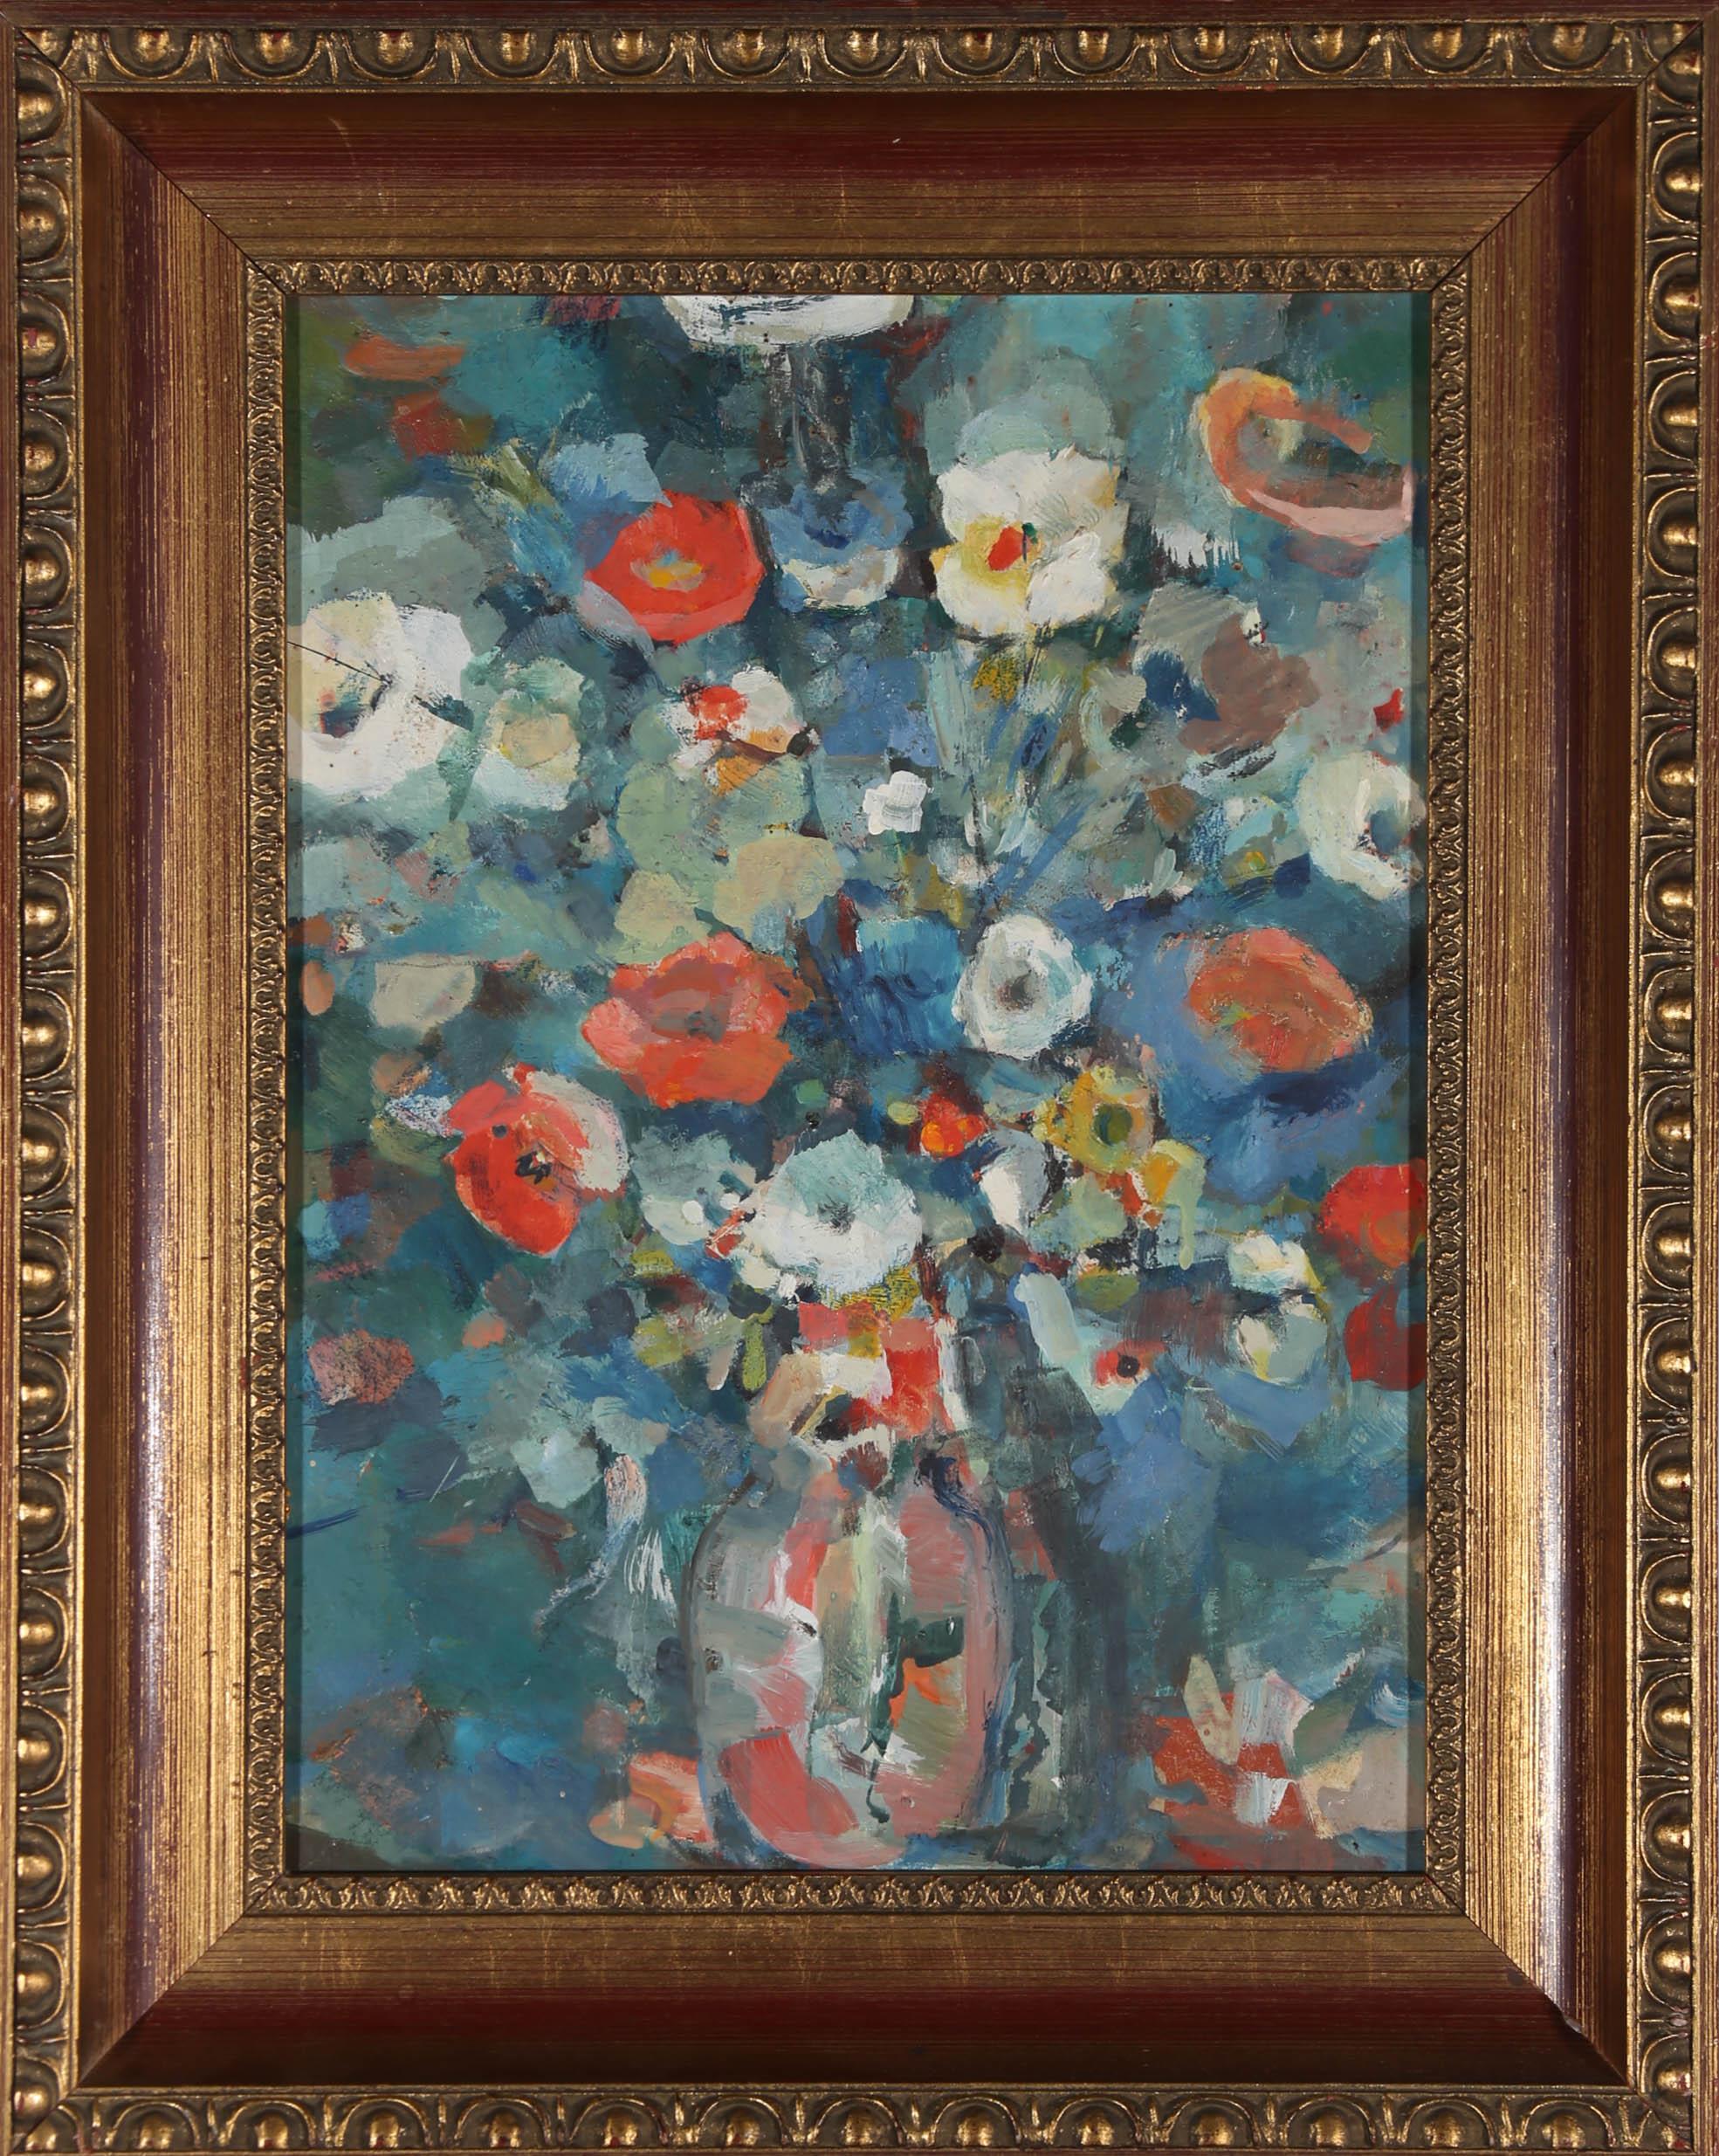 A dazzling 20th century oil painting depicting an impressionistic bouquet of red, white, and blue flowers, tightly arranged in a delicate glass vase. The painting is well presented in a substantial gilt and maroon coloured frame, with decorative egg